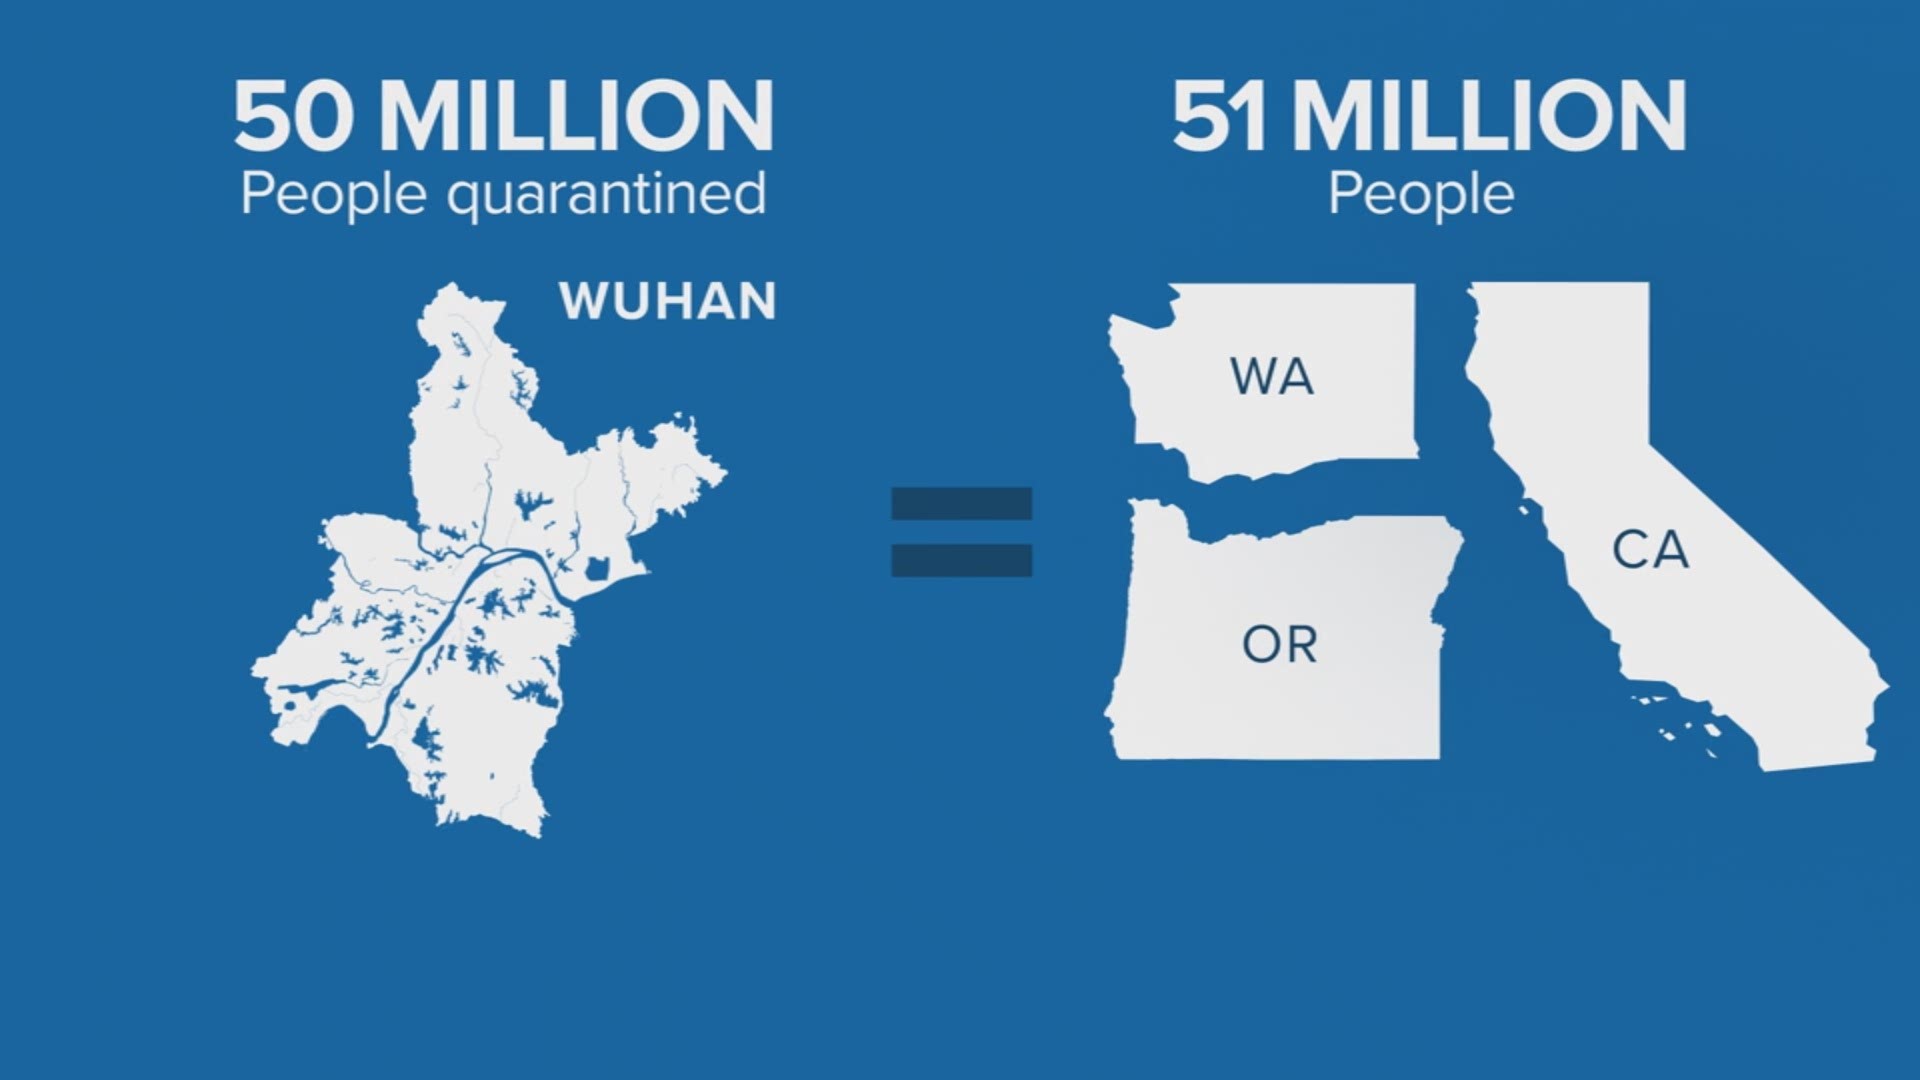 Right now, there are about 50-million people quarantined in and around Wuhan, China. That's the same number of people living in the West Coast.